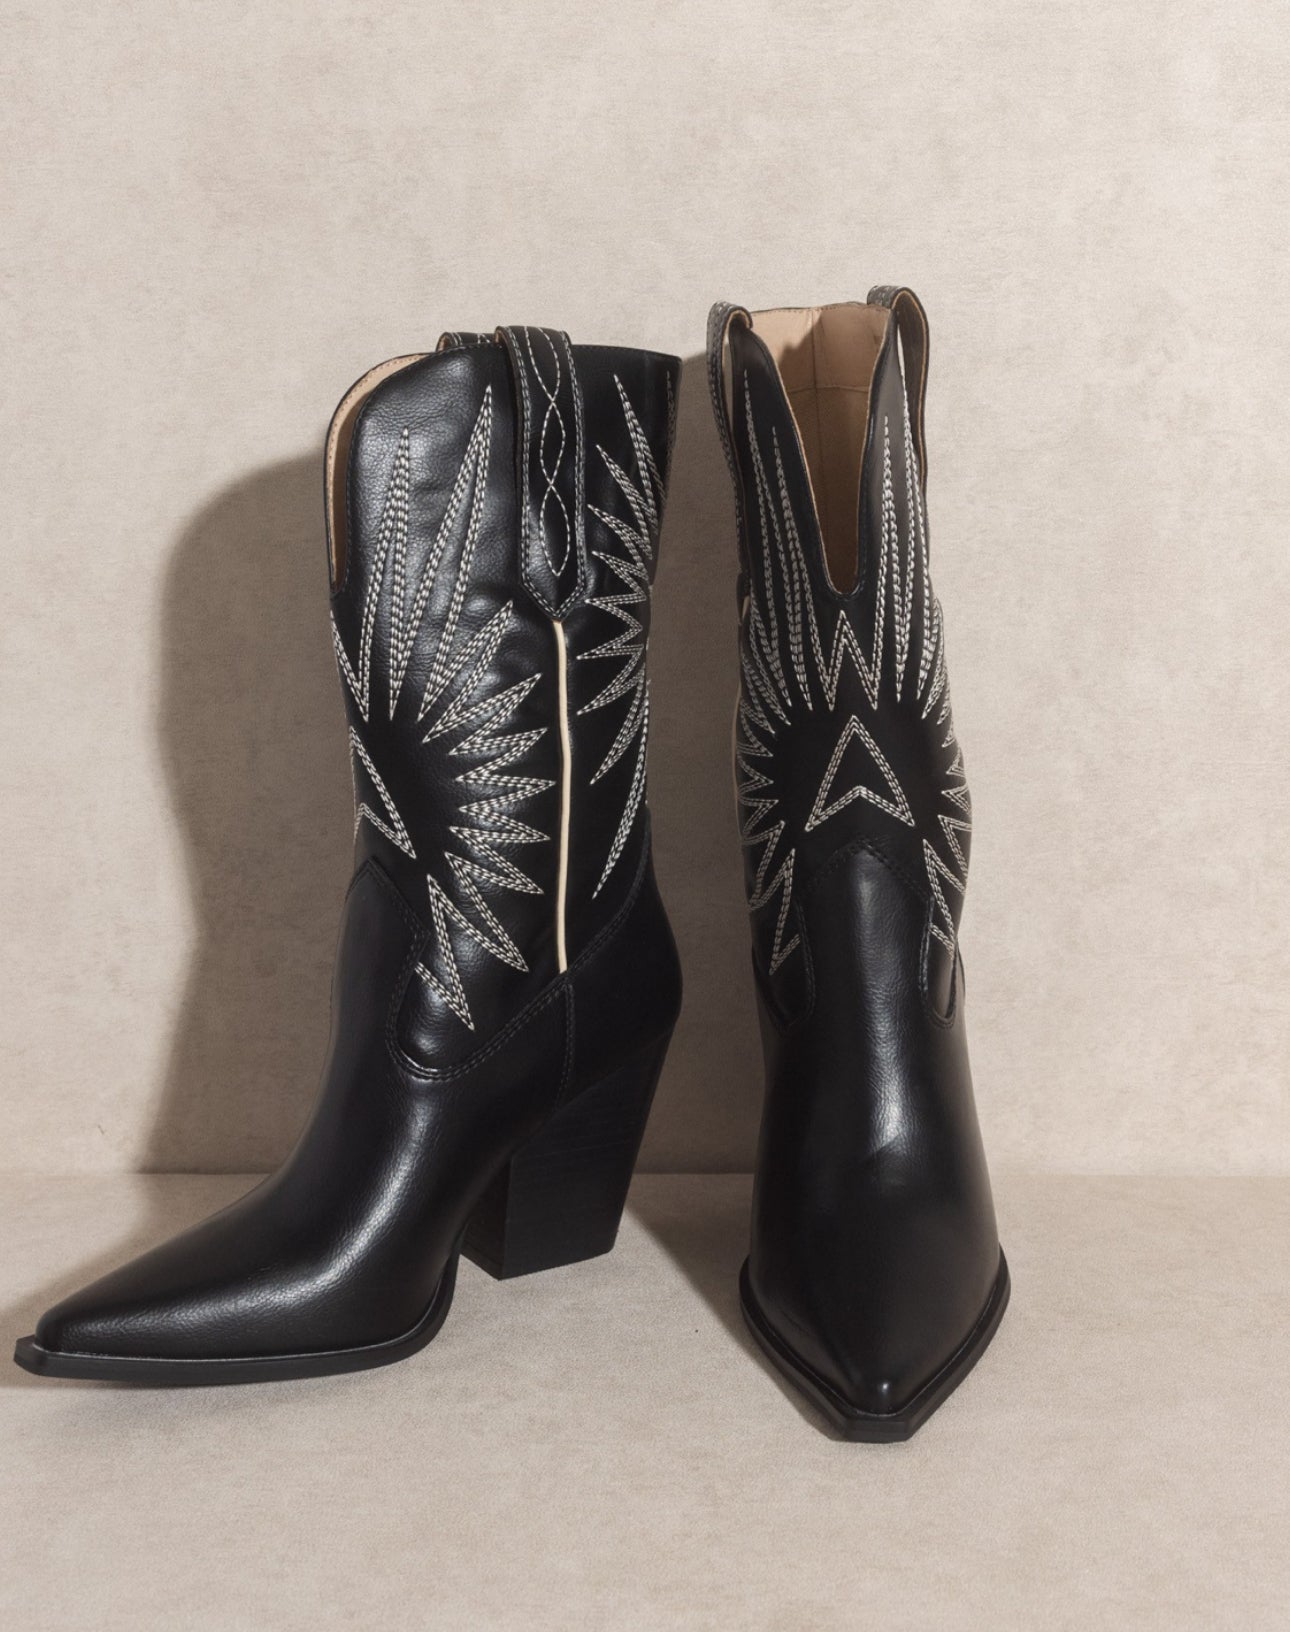 Punchy cowgirl boots